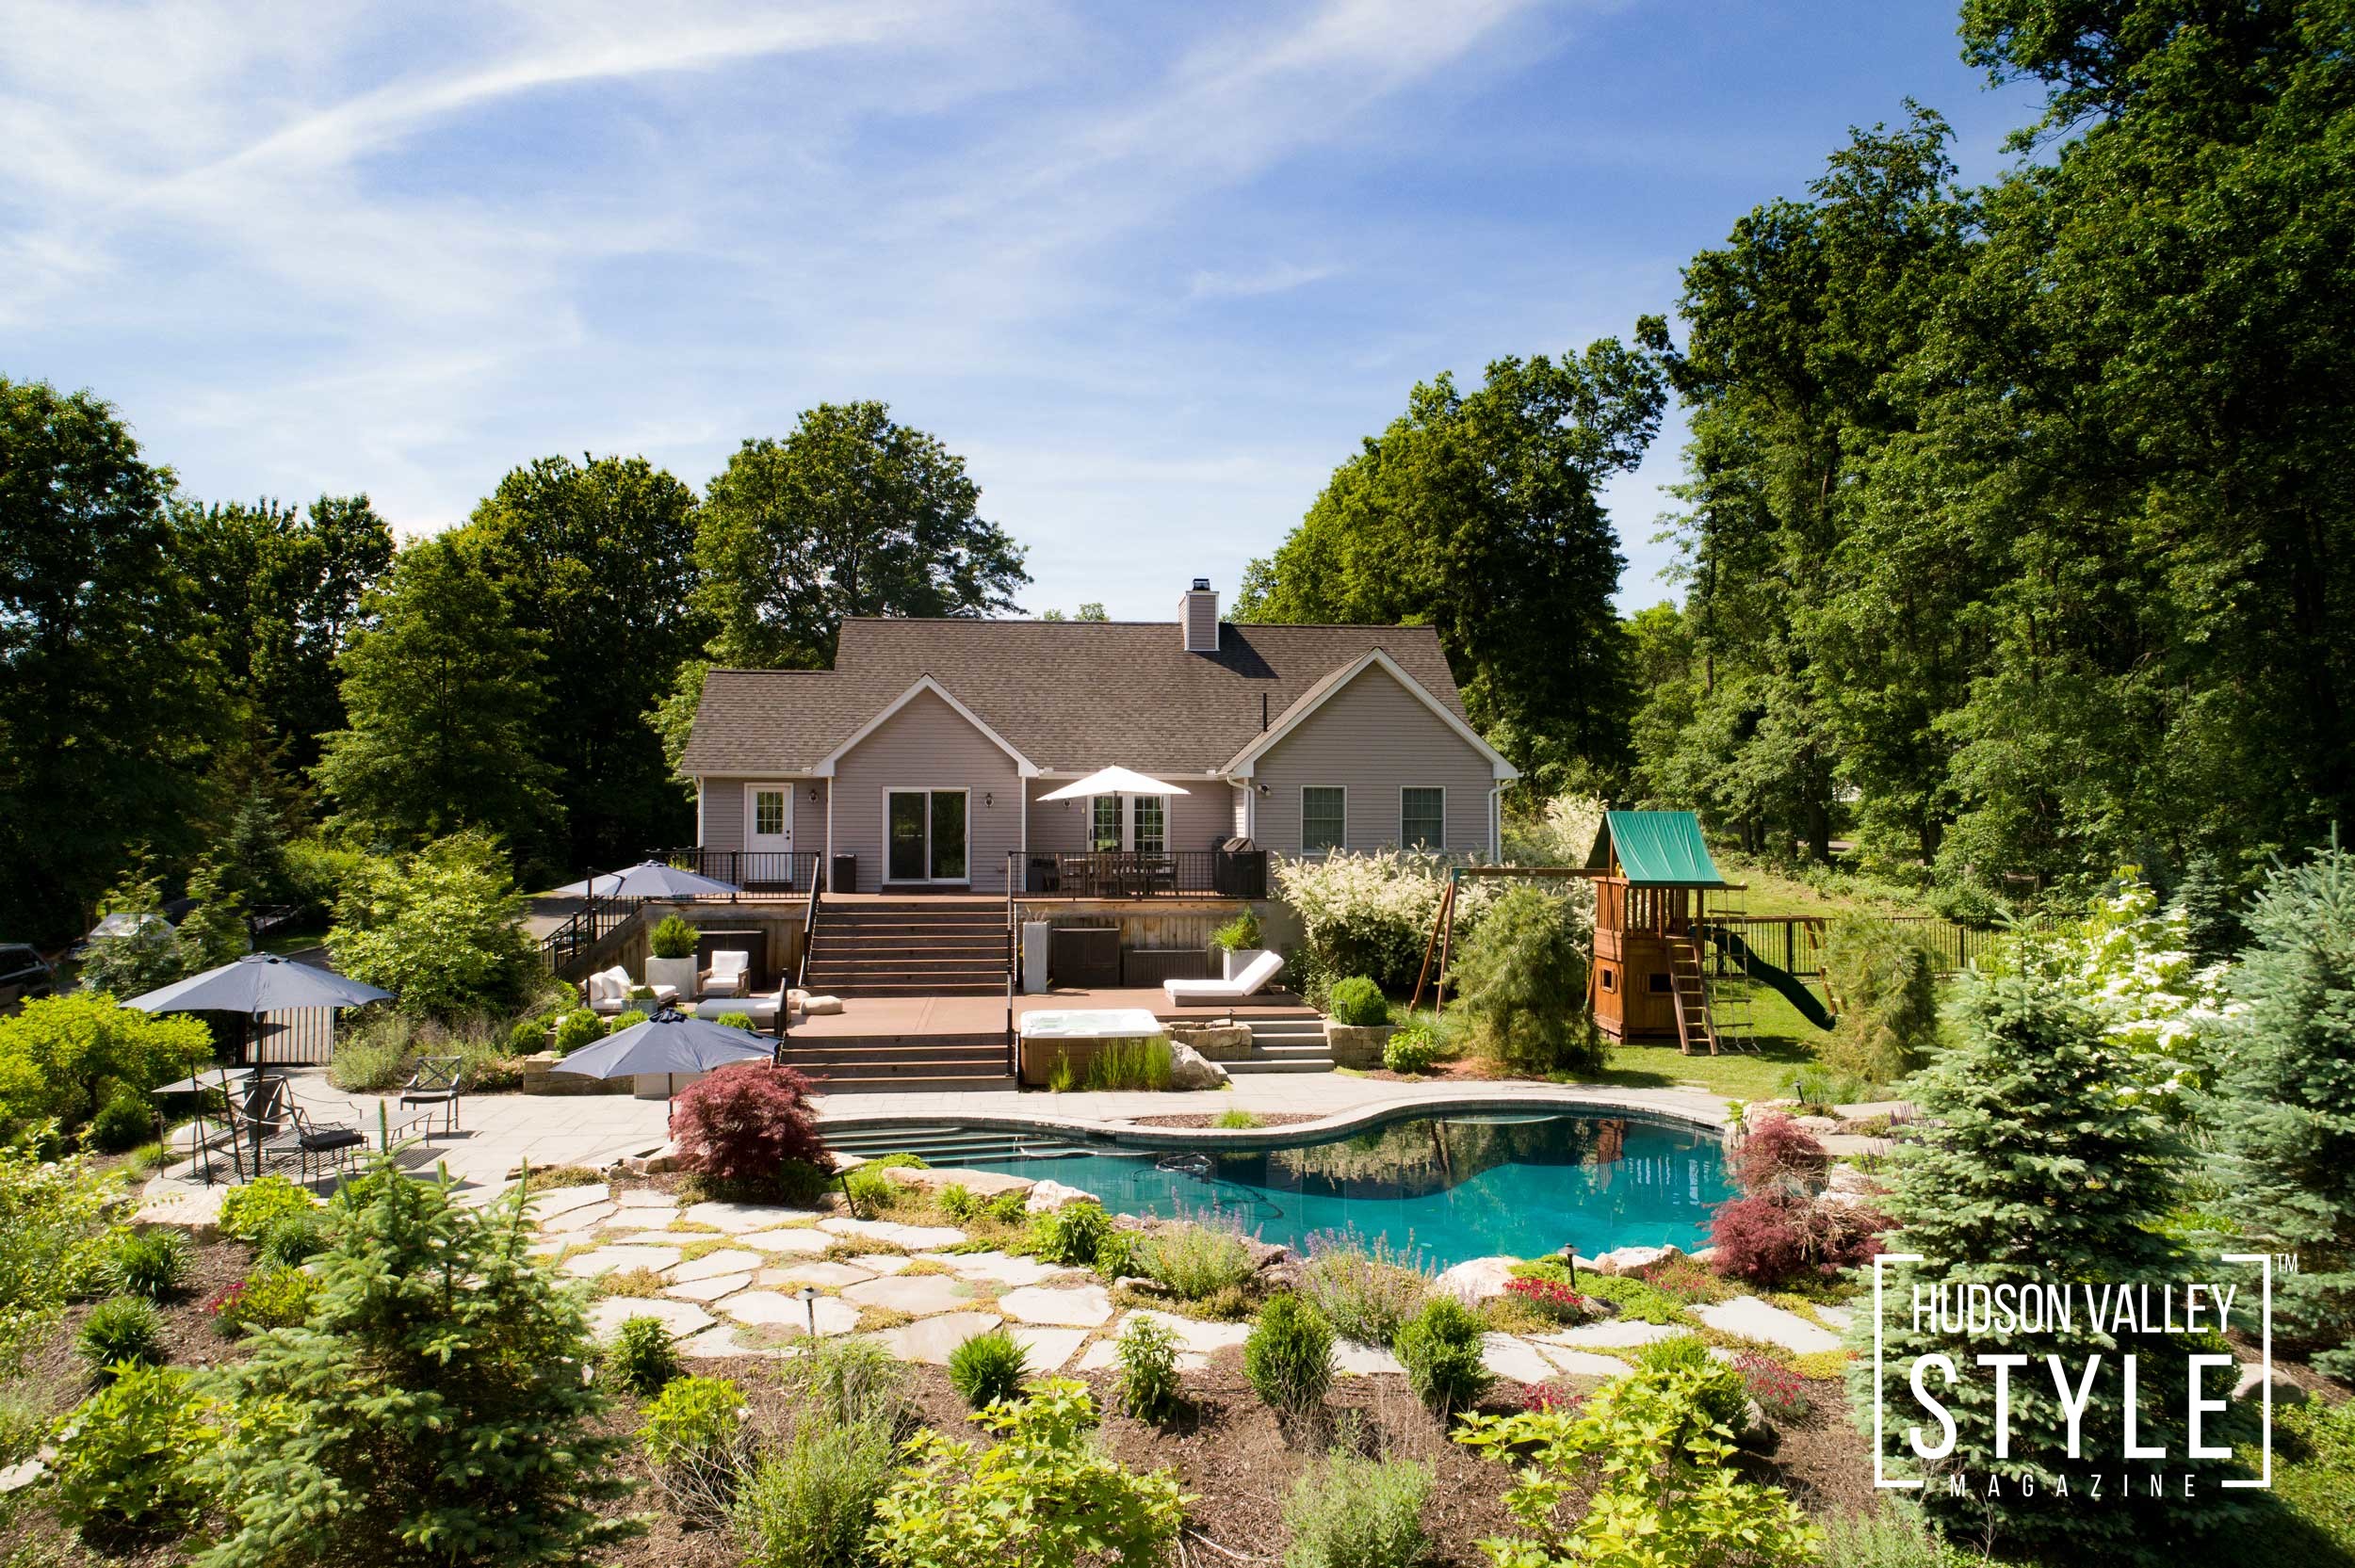 Luxury Summer Paradise with Heated Pool and Organic Garden, right here in the Hudson Valley